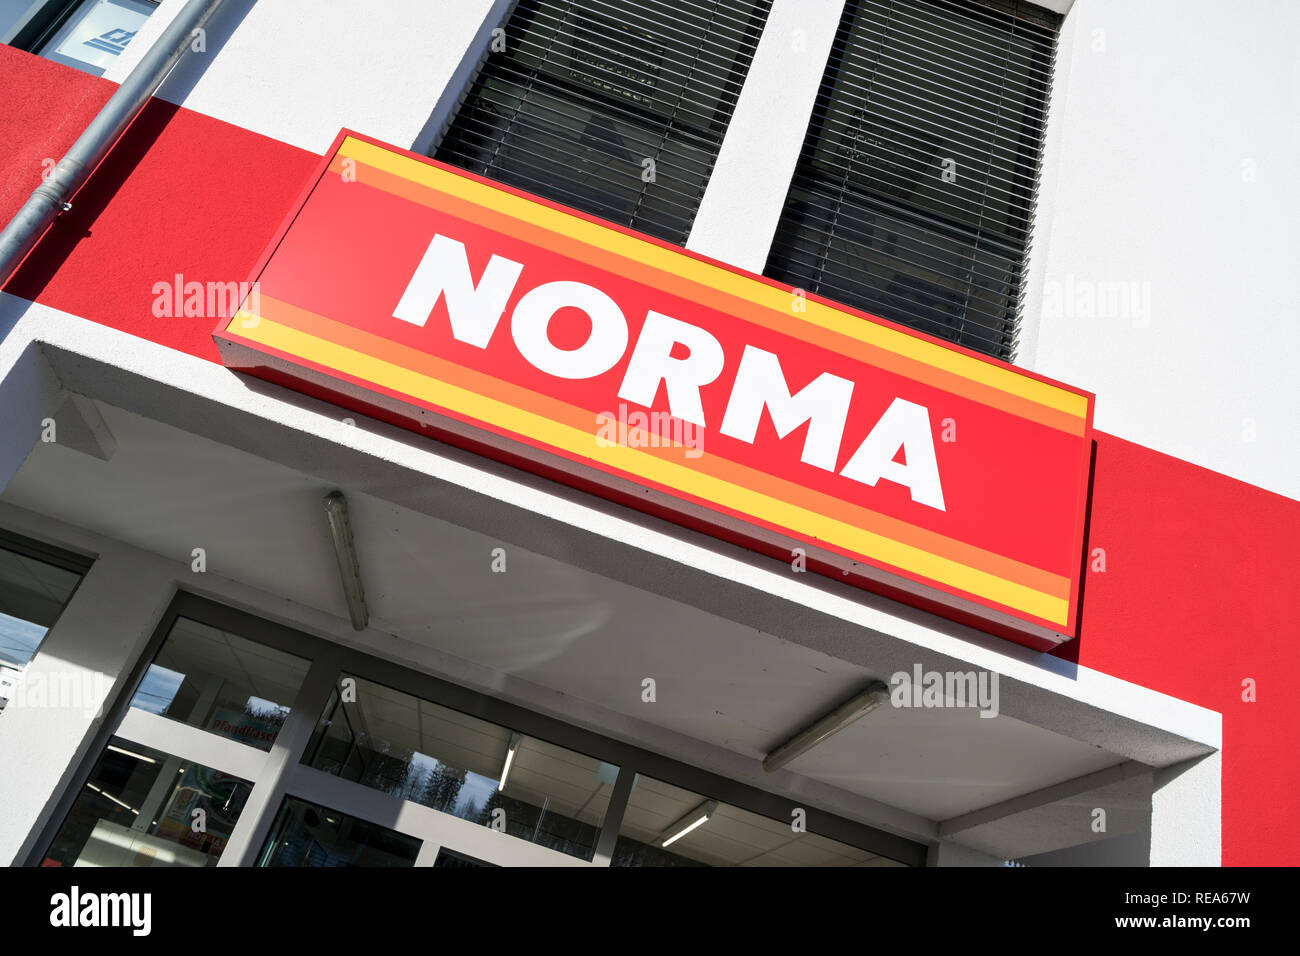 Norma sign at branch. Norma is a food discount store with more than 1,300 stores in Germany, Austria, France and the Czech Republic. Stock Photo